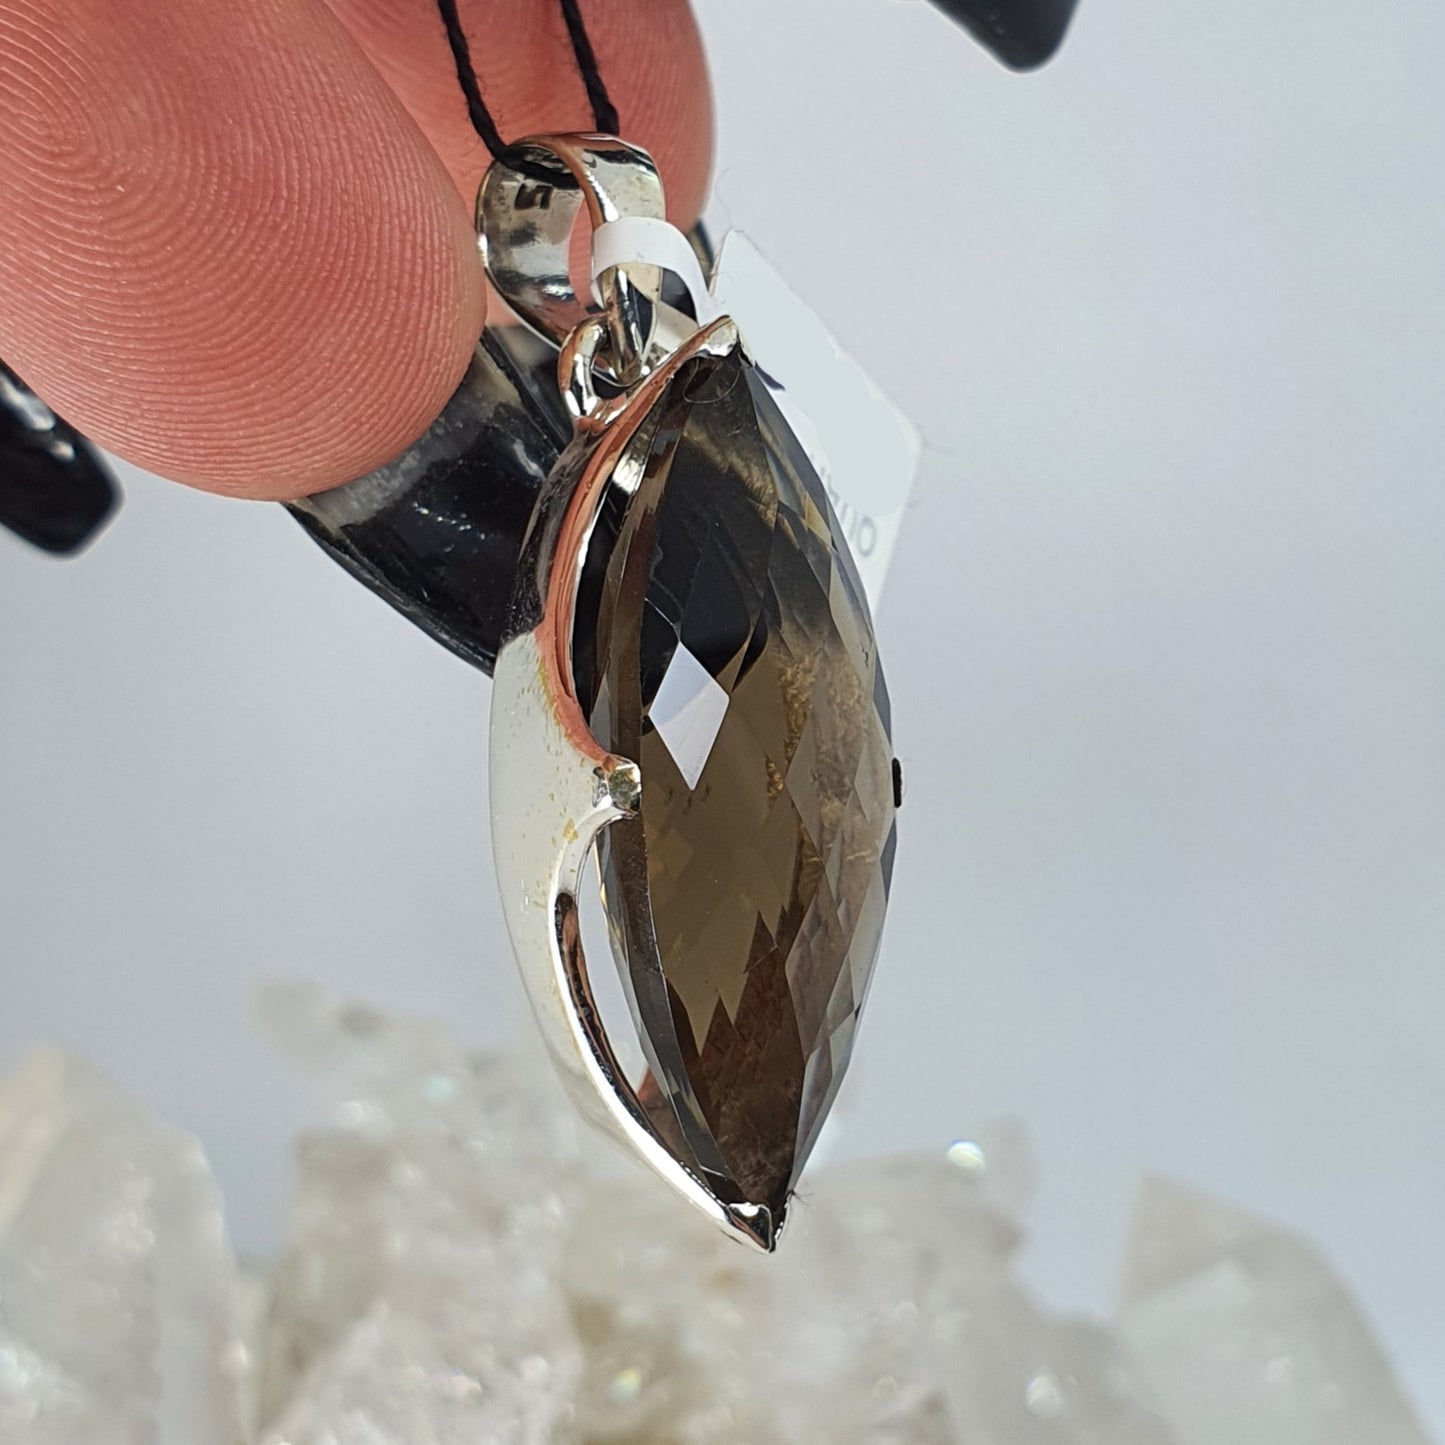 Crystals - Smoky Quartz Faceted Pendant - Sterling Silver